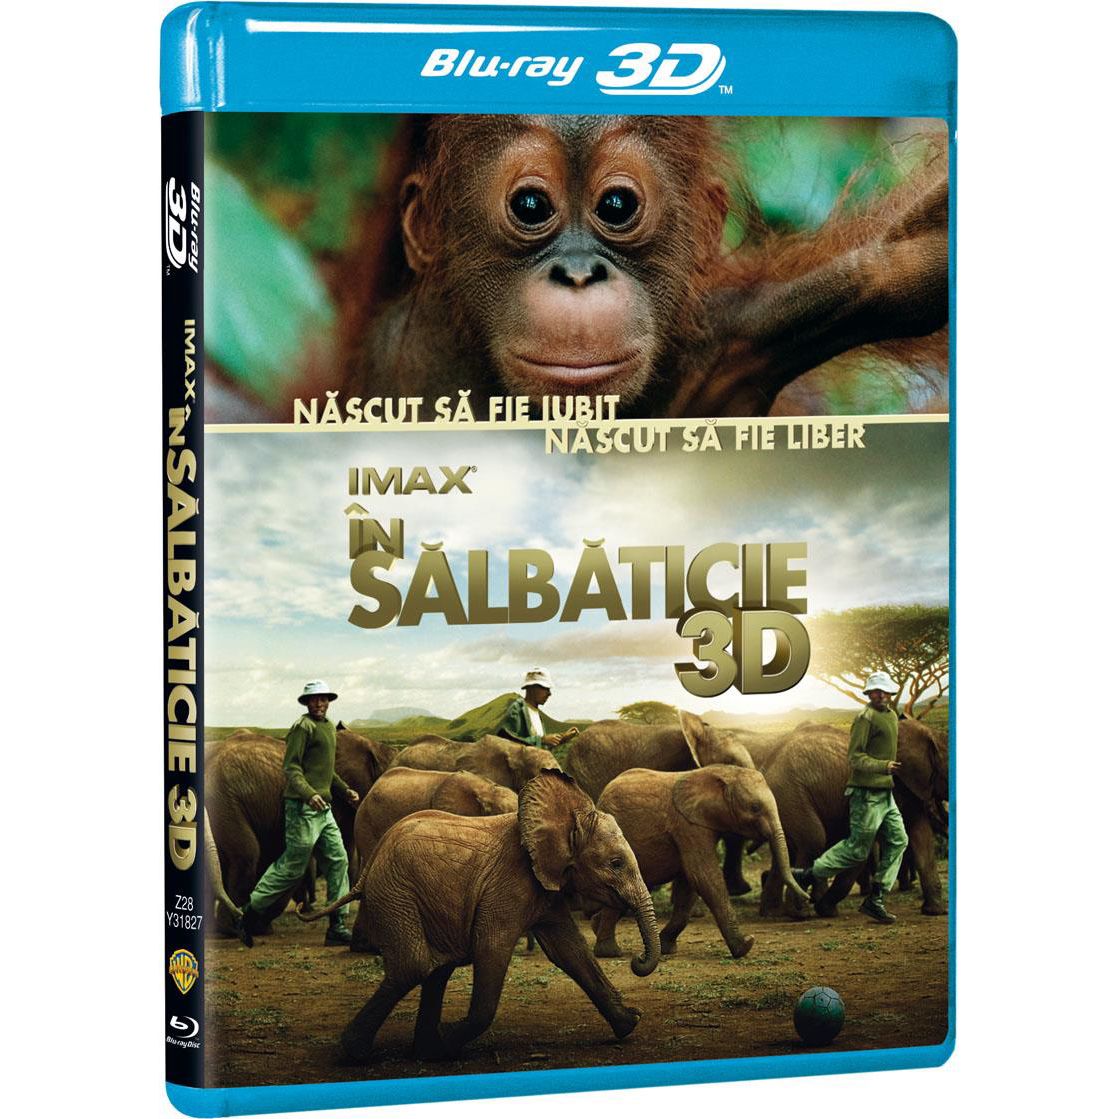 In salbaticie 3D (Blu Ray Disc) / Born to Be Wild | David Lickley